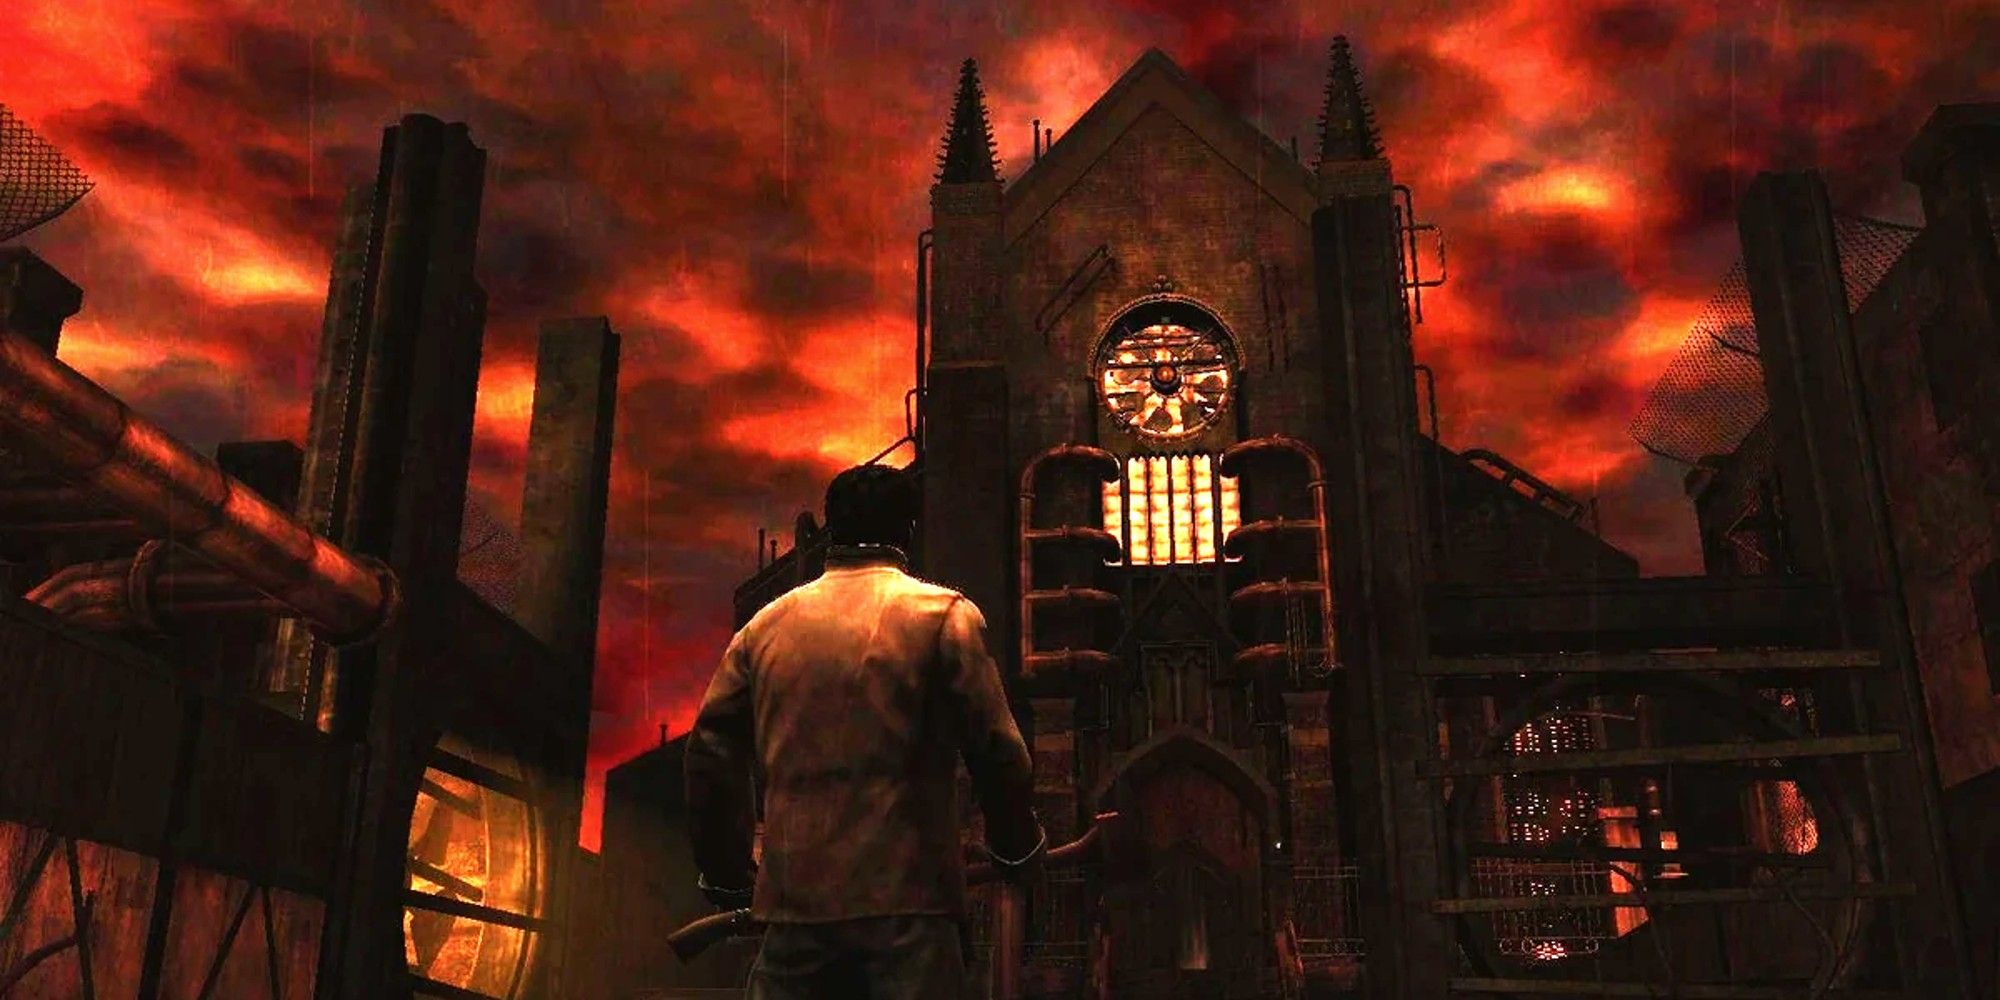 The Order's church Silent Hill